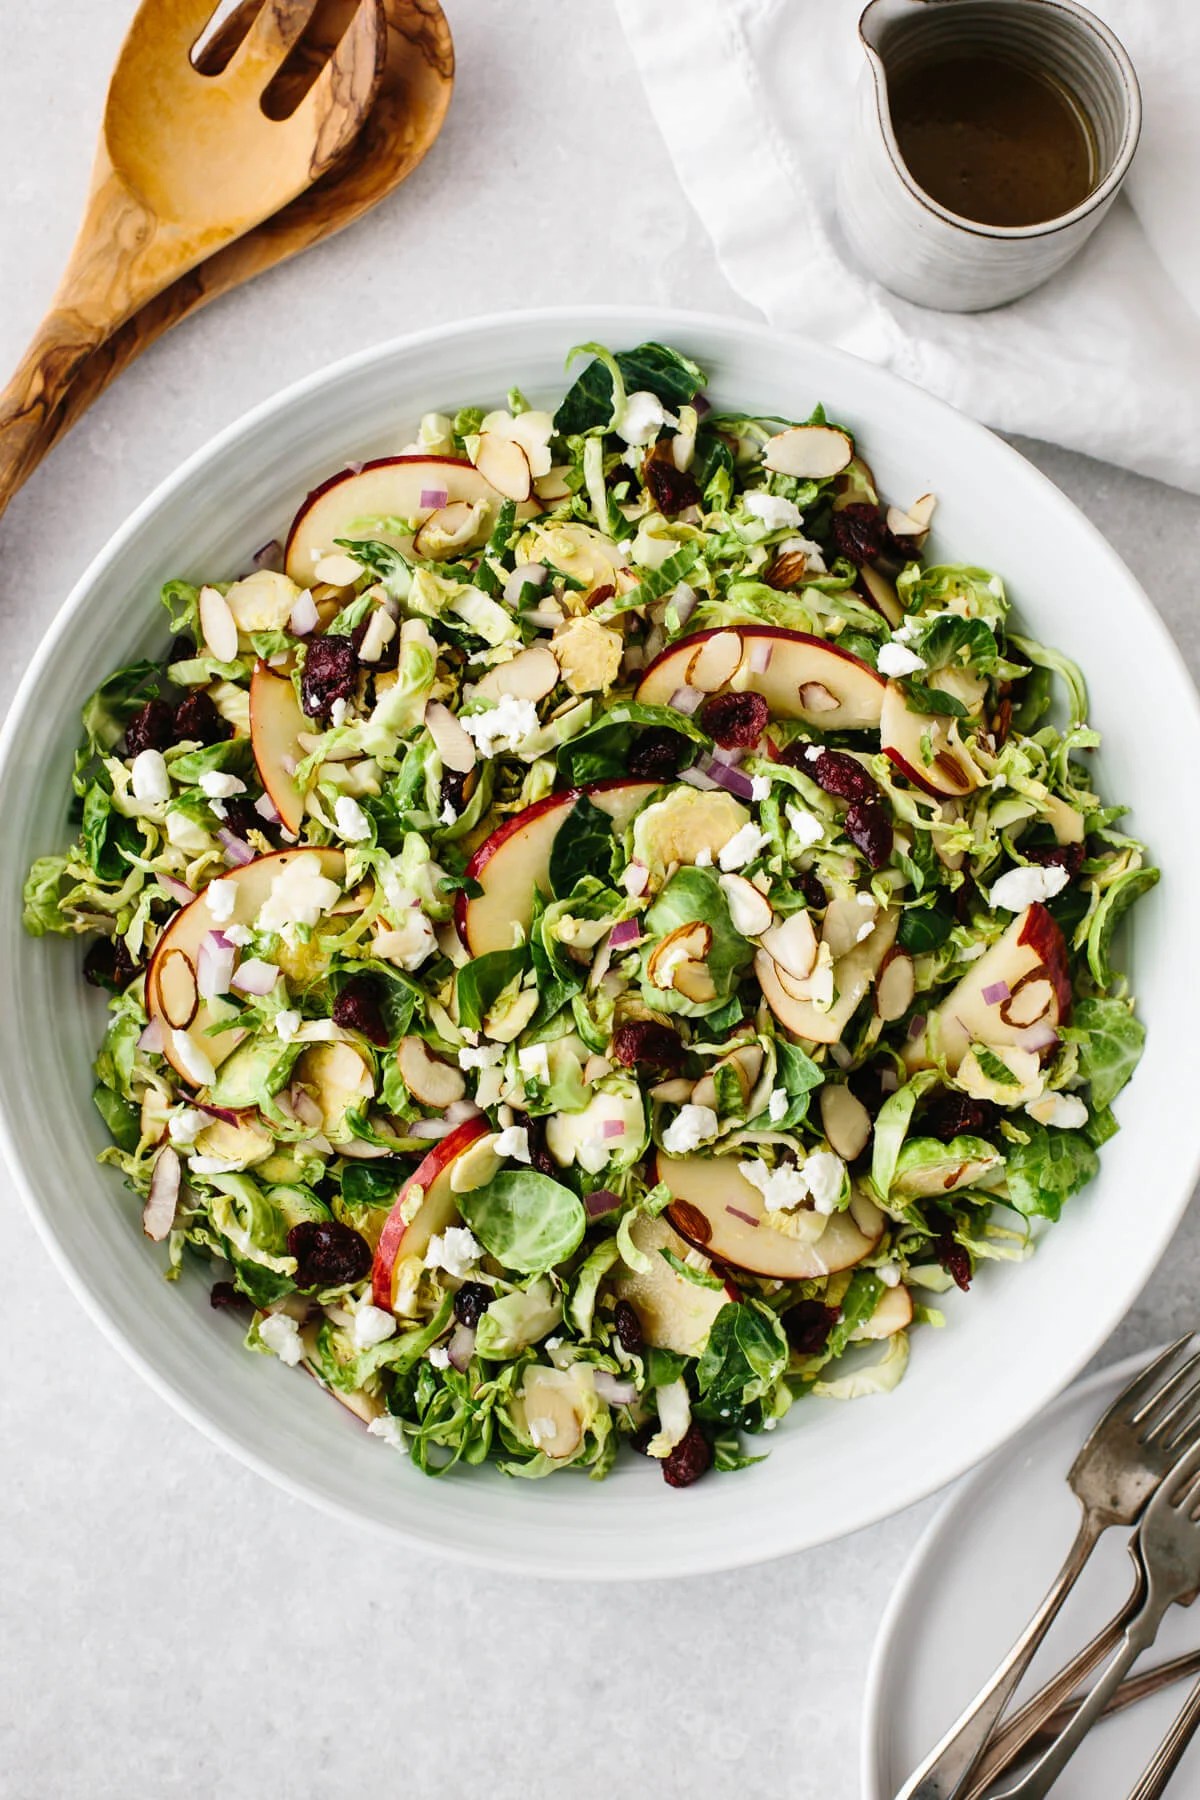 Shaved Brussels sprouts salad in a white bowl.